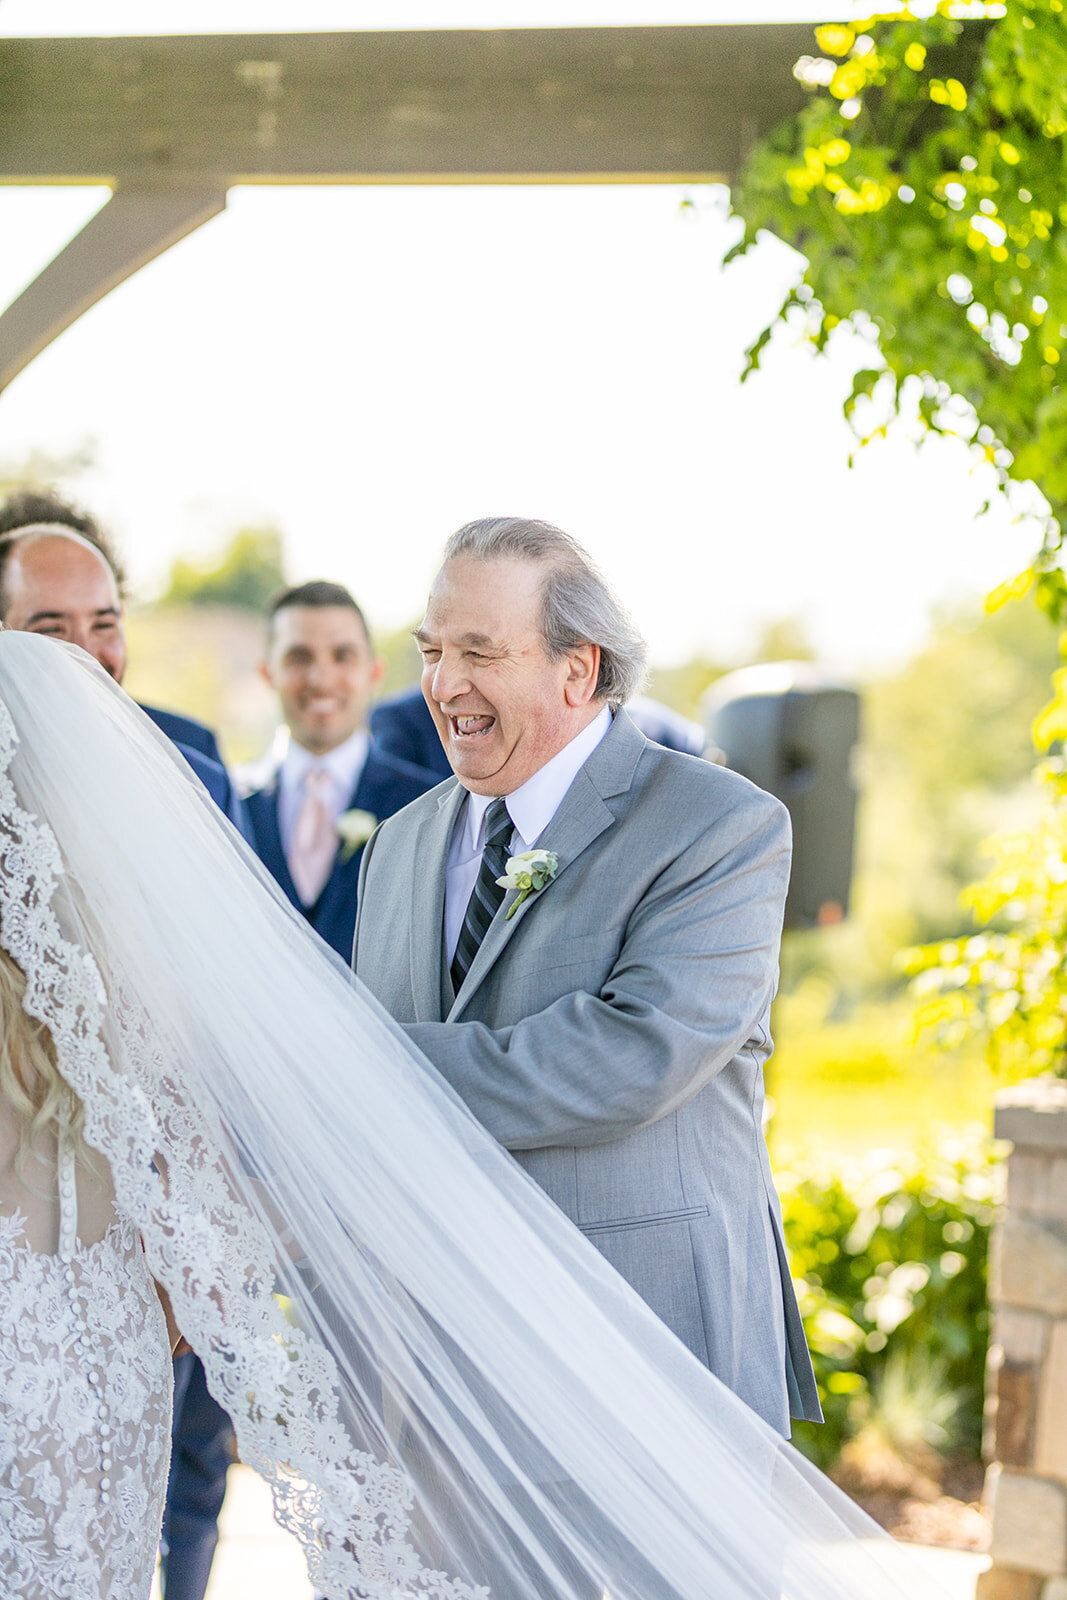 Uncle smiling as he walks bride down the aisle